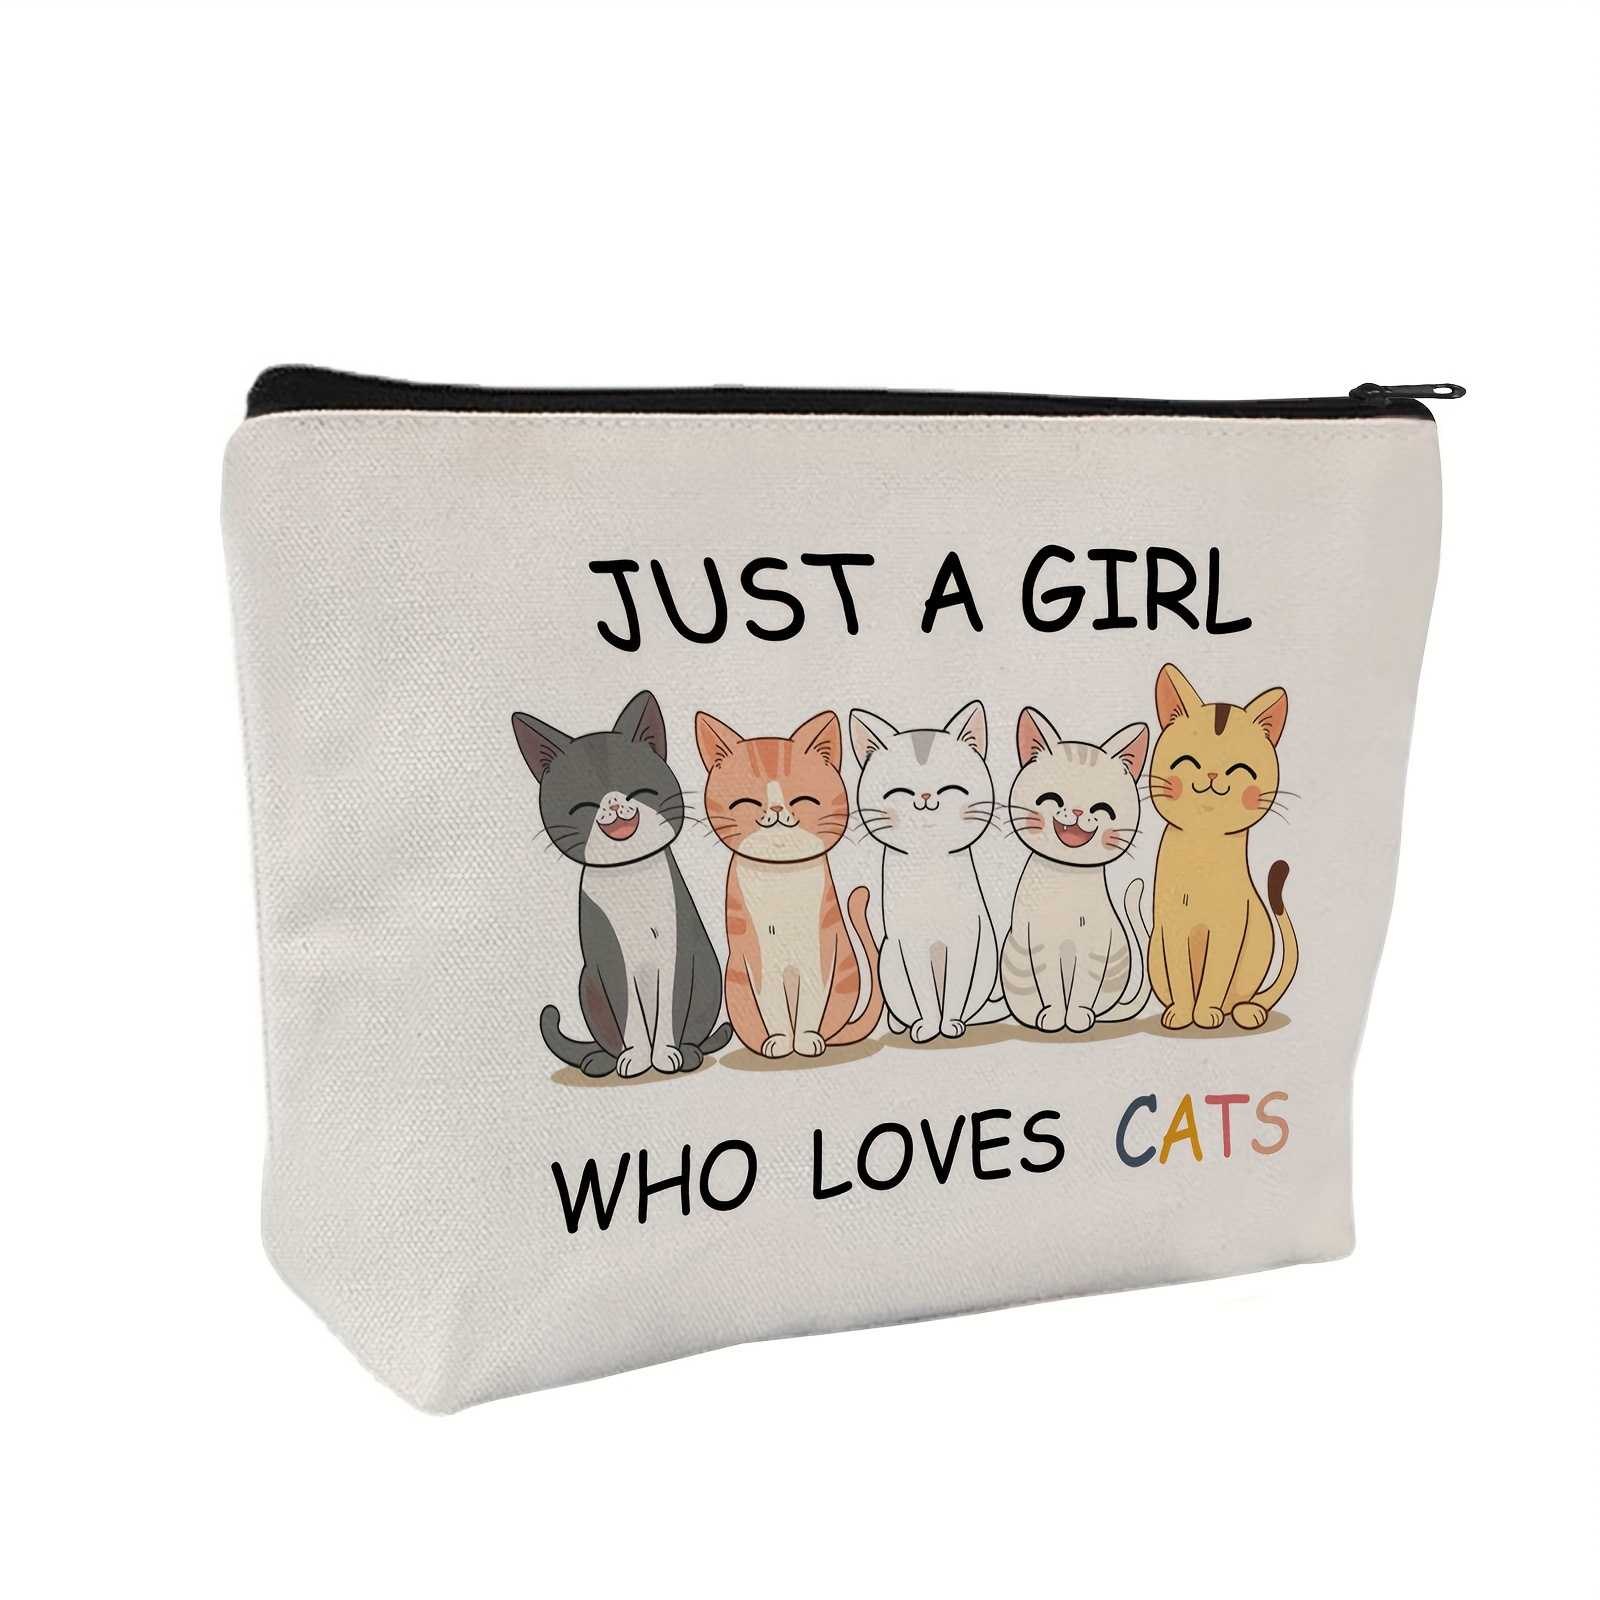 

Charming Cat-themed Canvas Makeup Bag - Perfect Gift For Animal Lovers, Non-waterproof Zippered Cosmetic Pouch For Travel & Toiletries